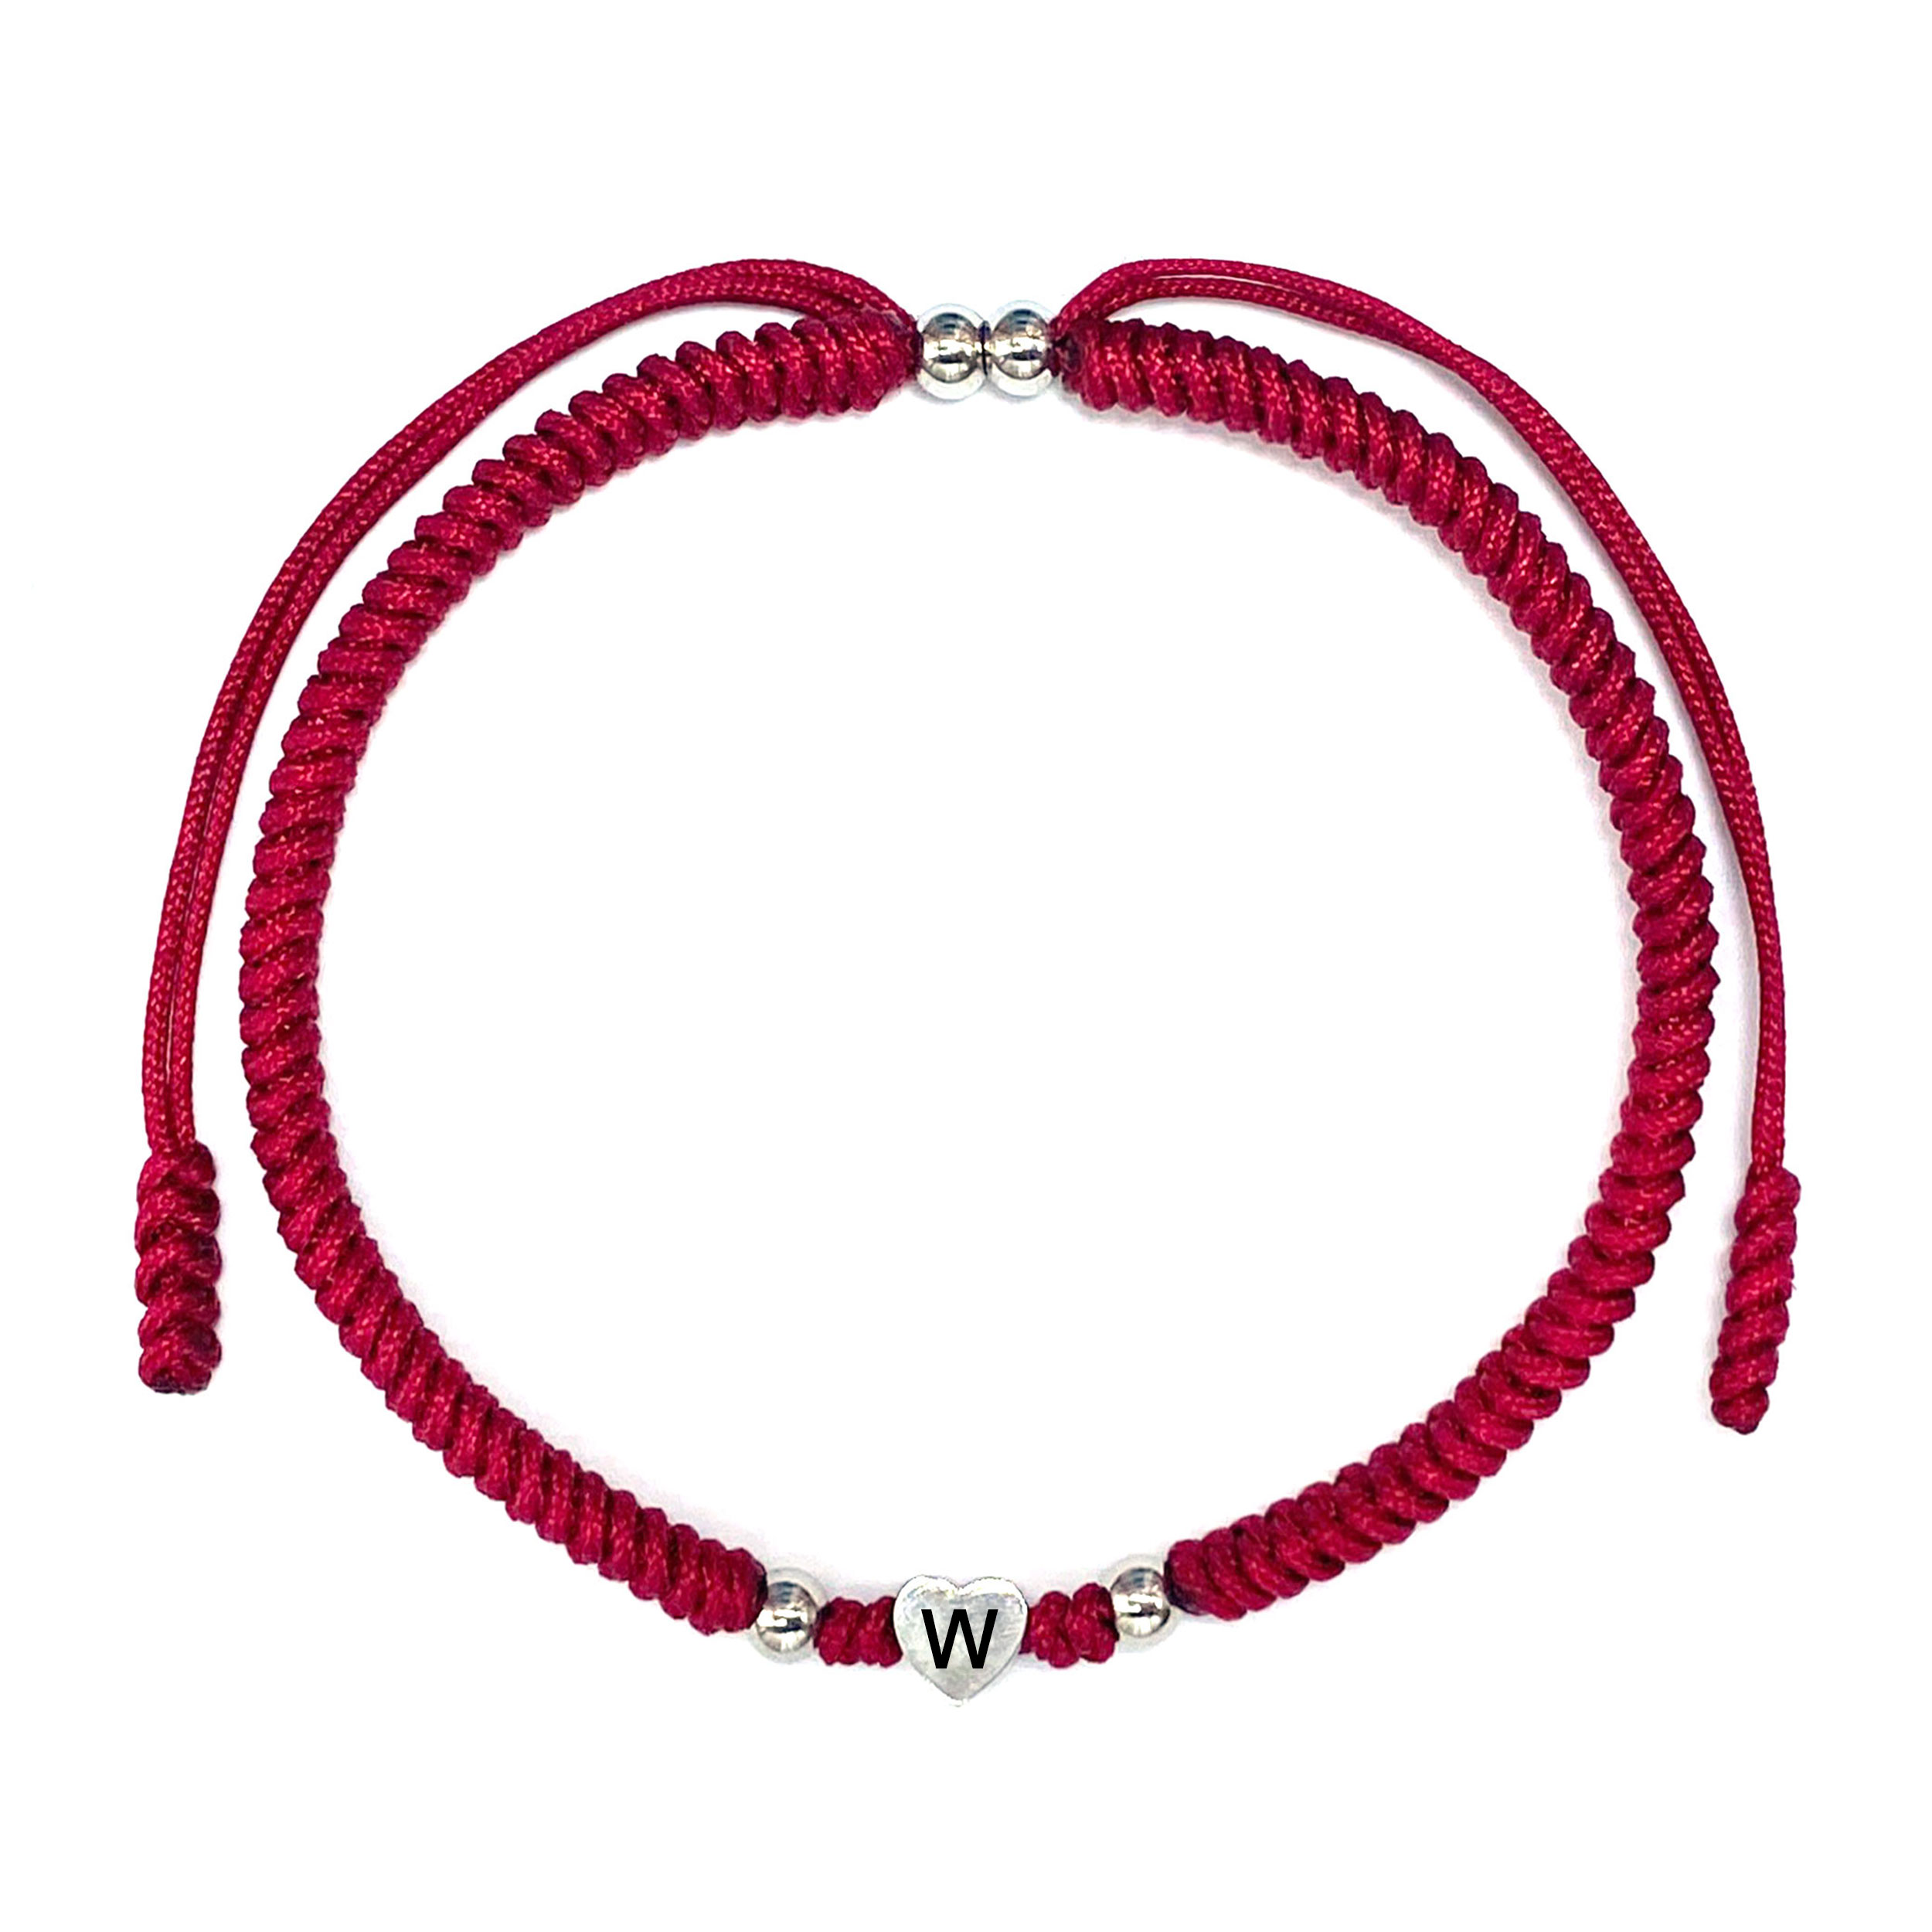 Initial Letter W Bracelet, Dark Red with Greeting Card